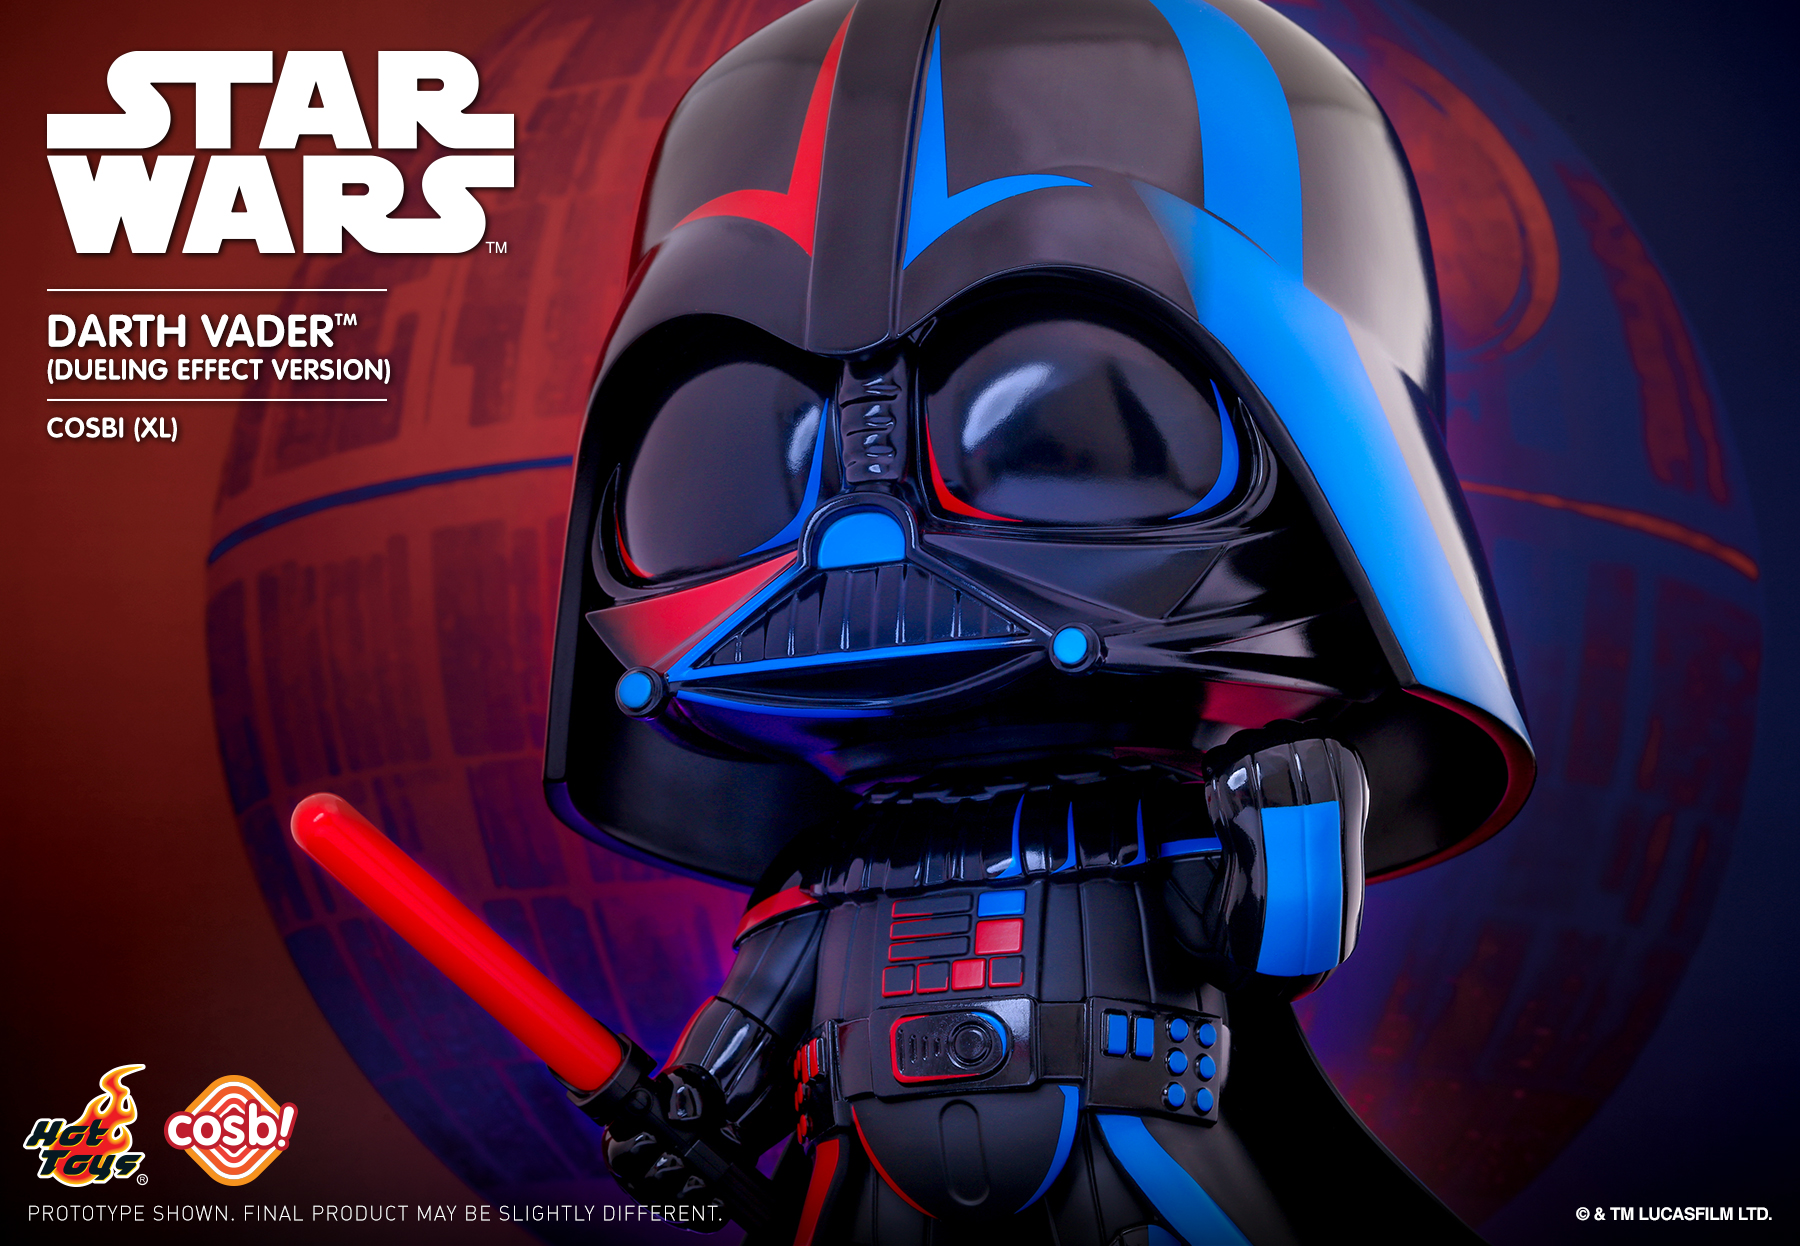 HotToys Cosbi(XL) CBX126 Darth Vader Dueling Effect Version(Star Wars Episode Ⅳ : A New Hope)